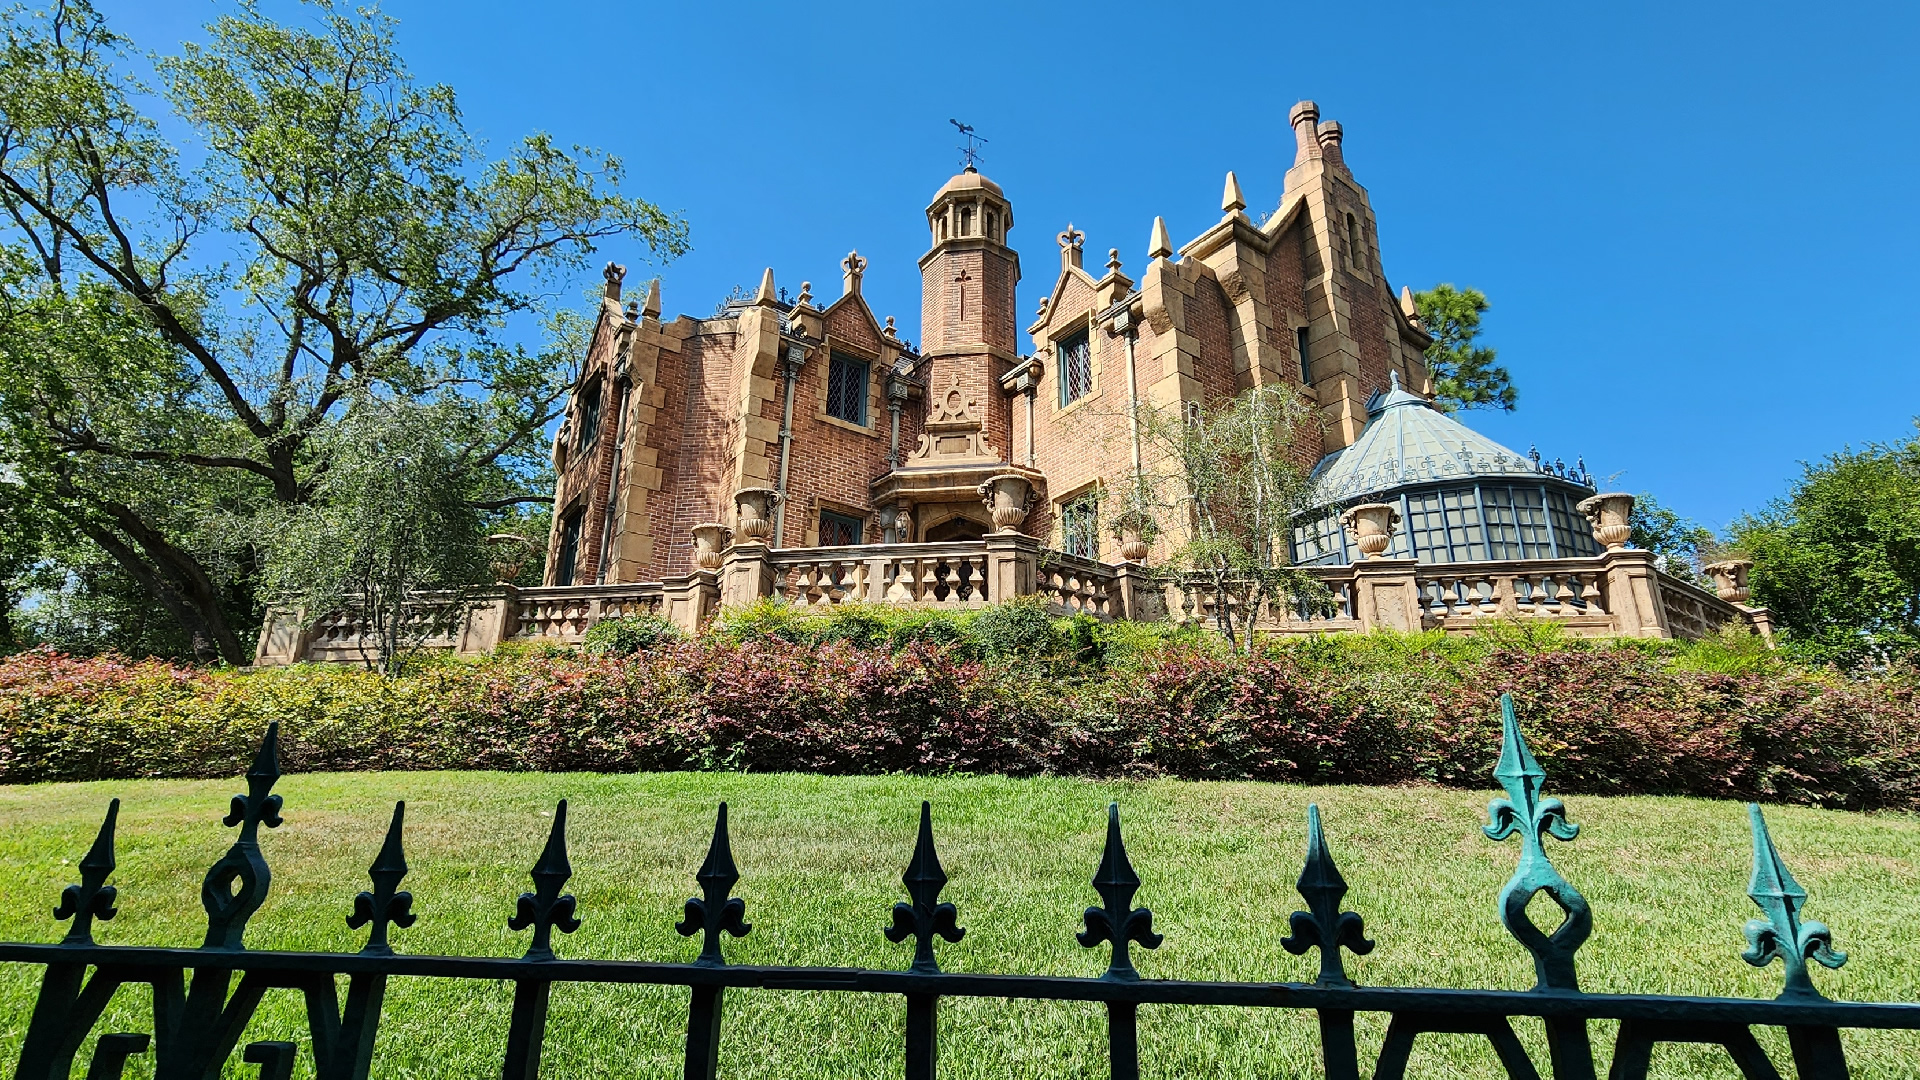 Haunted Mansion building, with green lawn, bushes, and an iron fence.